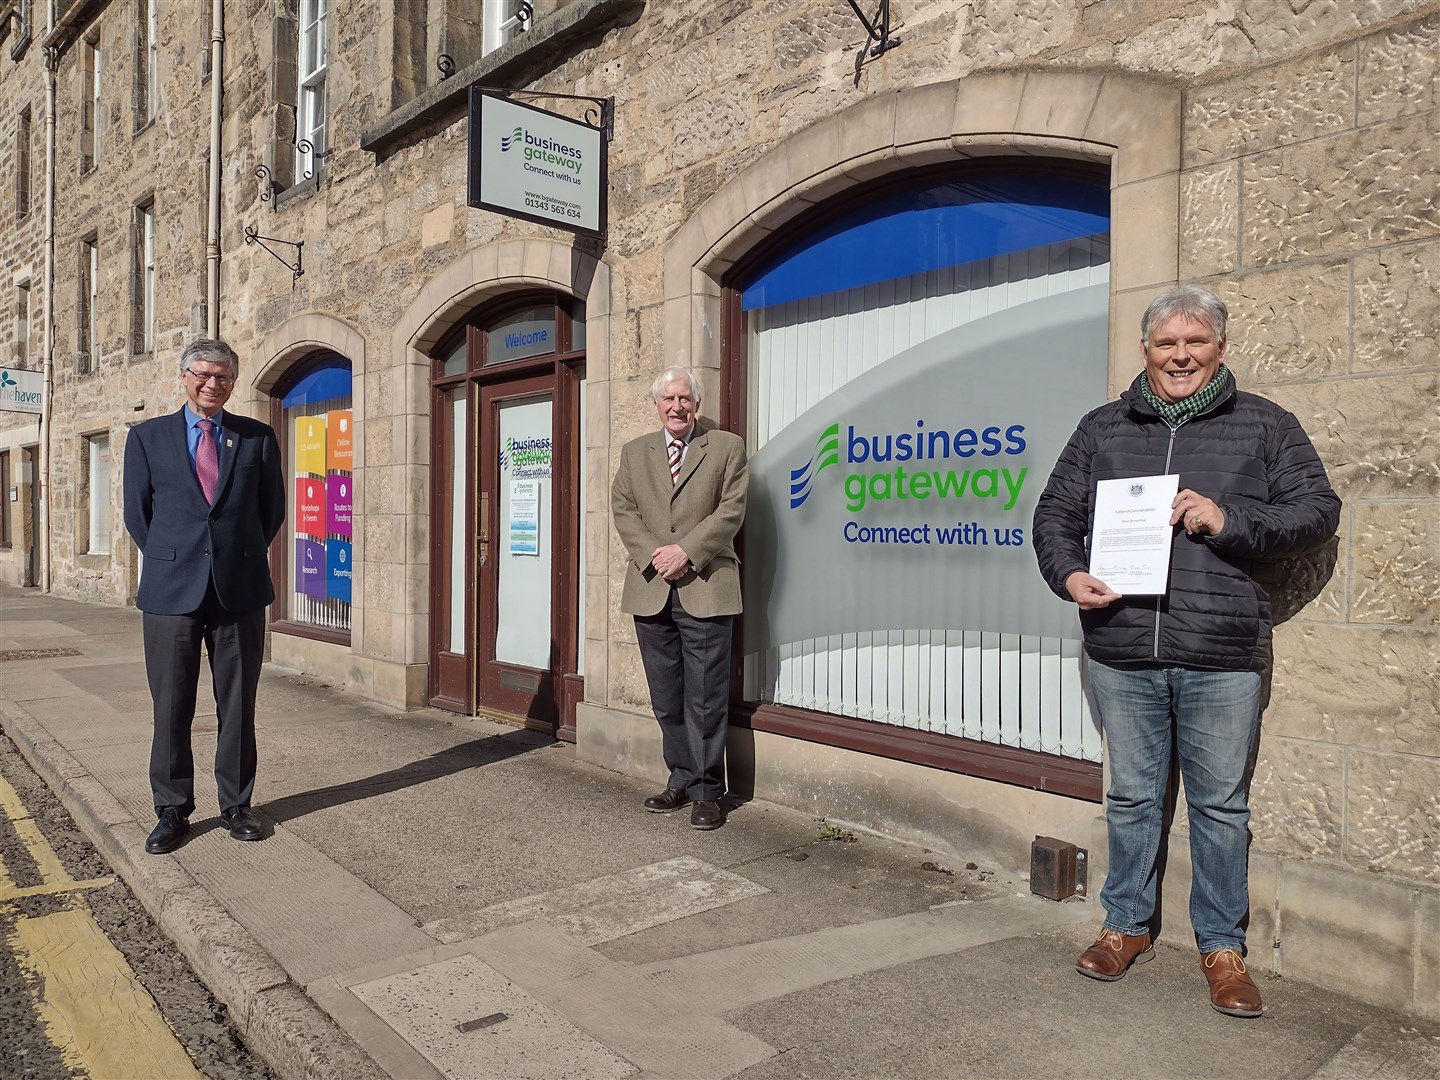 Lord Lieutenant of Banffshire Andrew Simpson (l) and Lord Lieutant of Moray Seymour Monro present a letter of commendation to Craig Robertson (r) of Business Gateway.